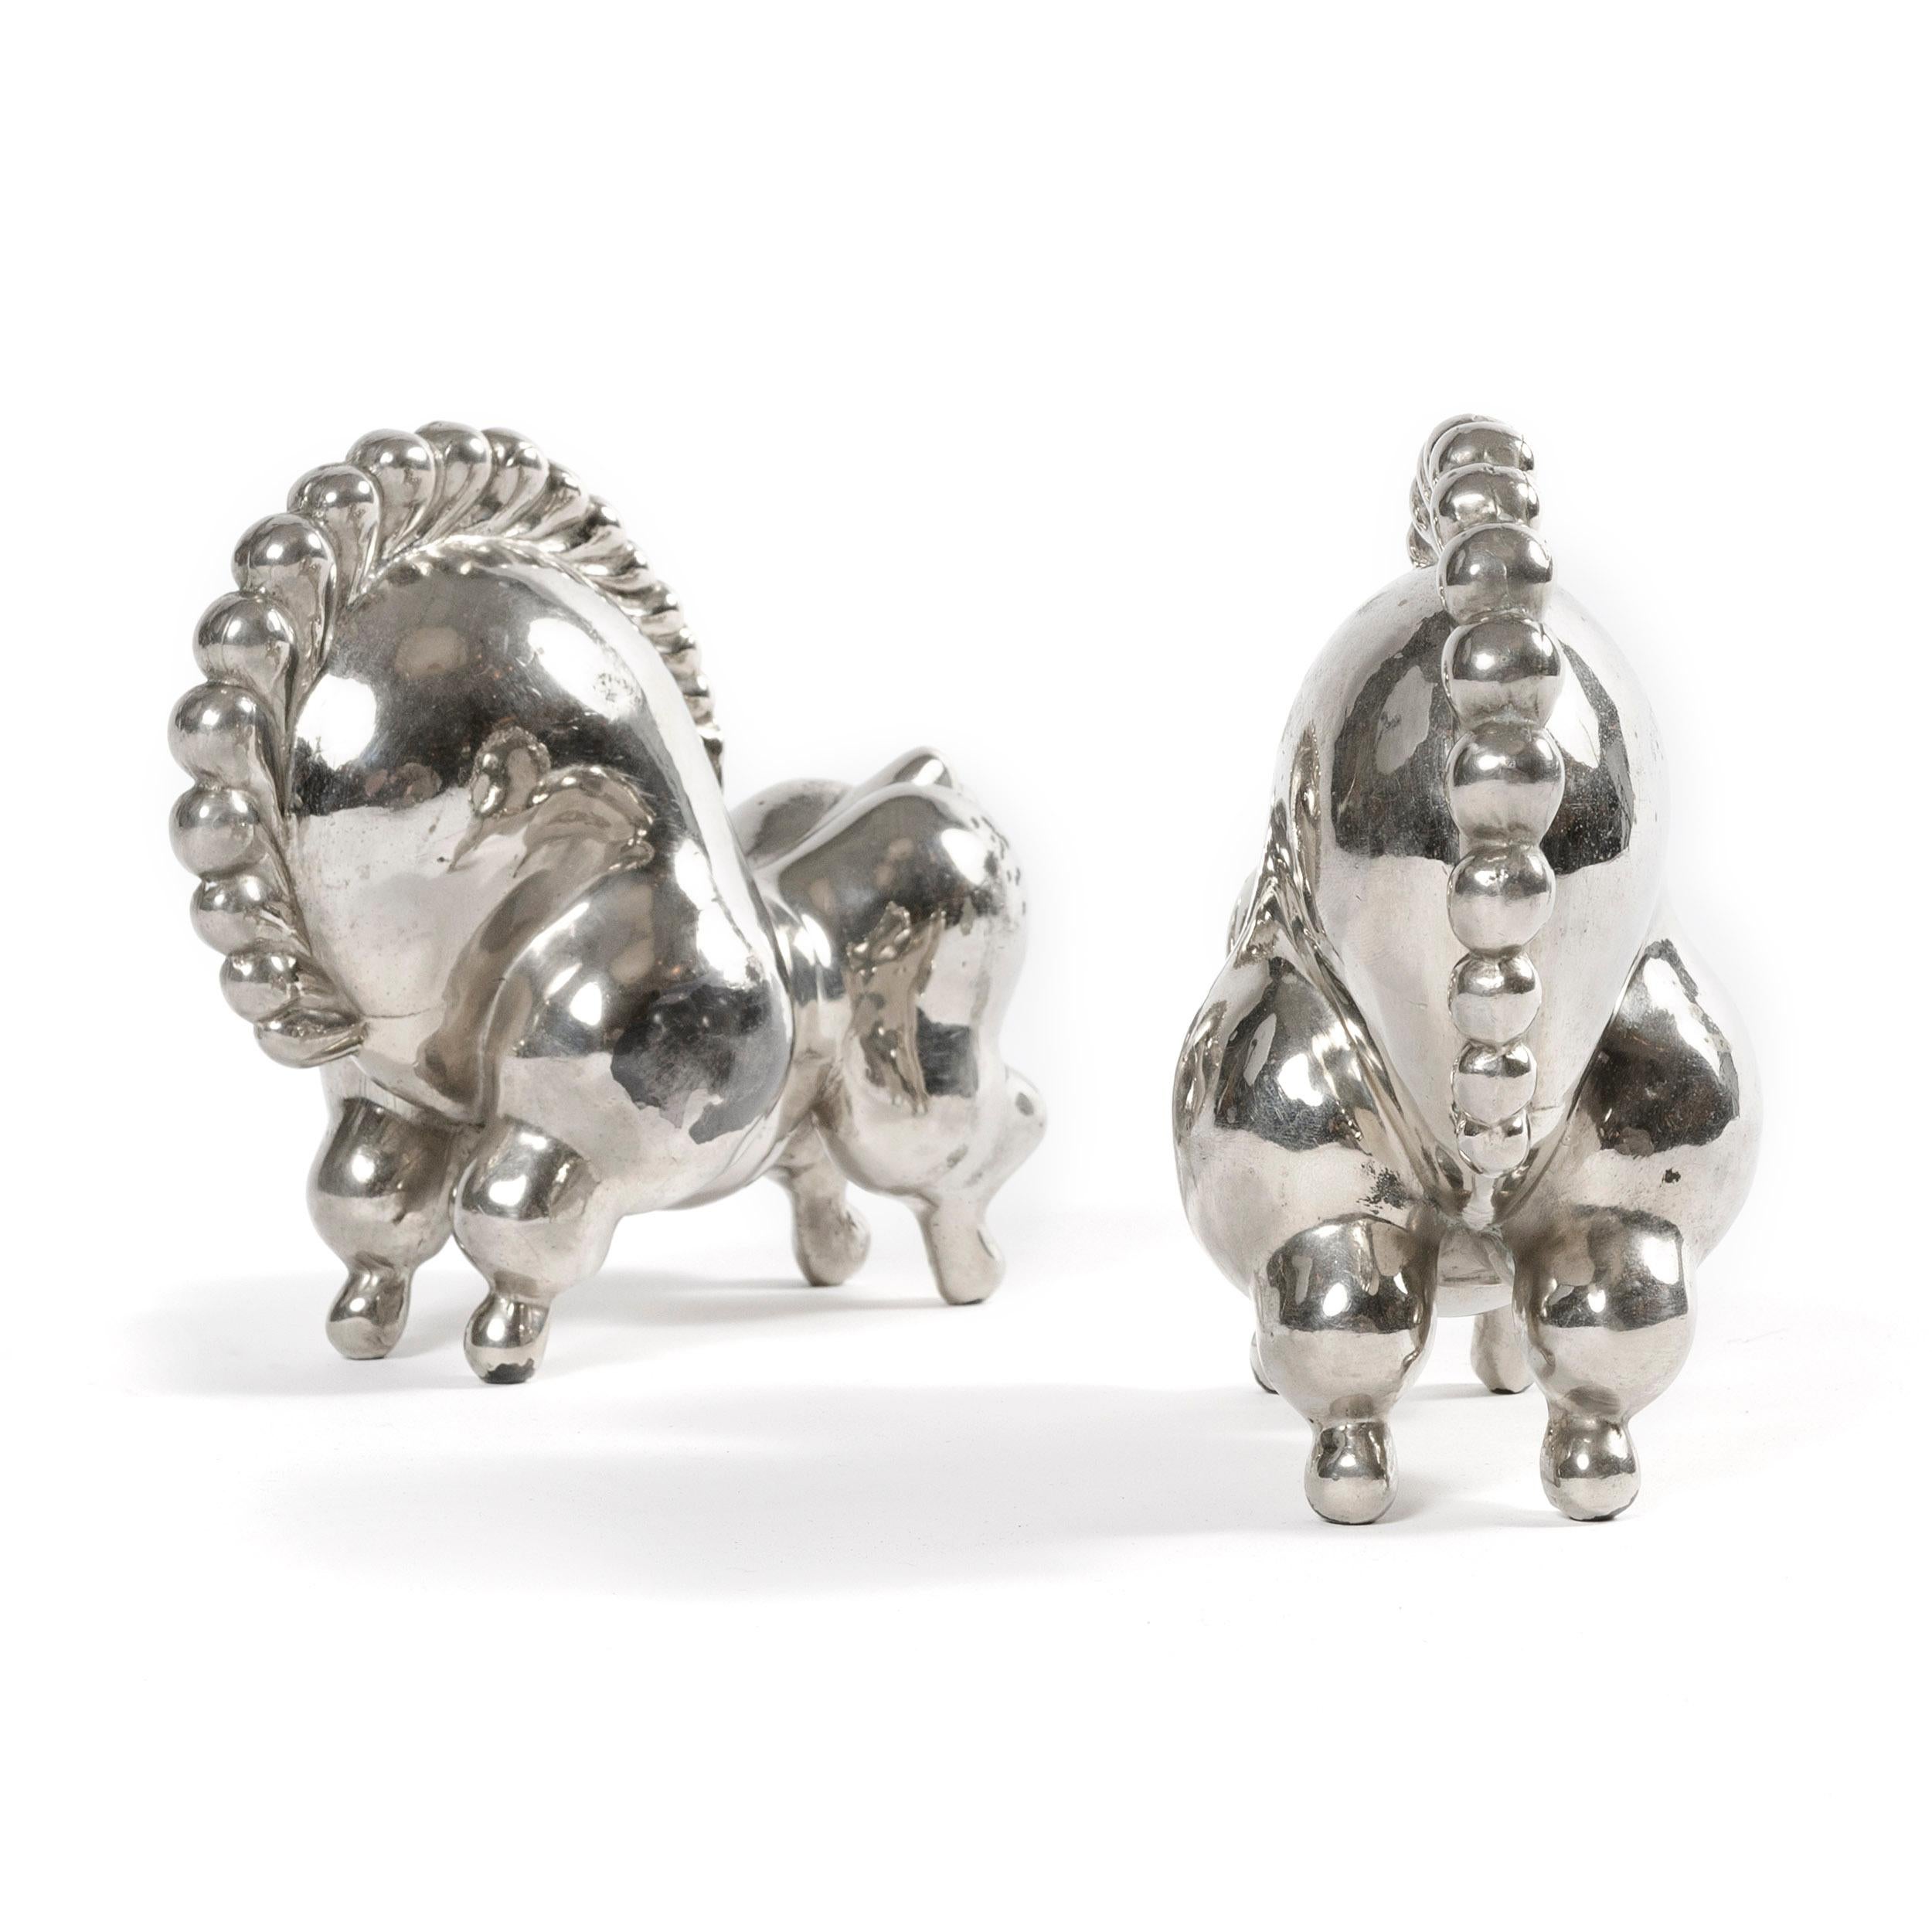 An early pair of nickel-plated, fanciful 'Libbiloo' circus horse bookends by Russel Wright. Marked RW.